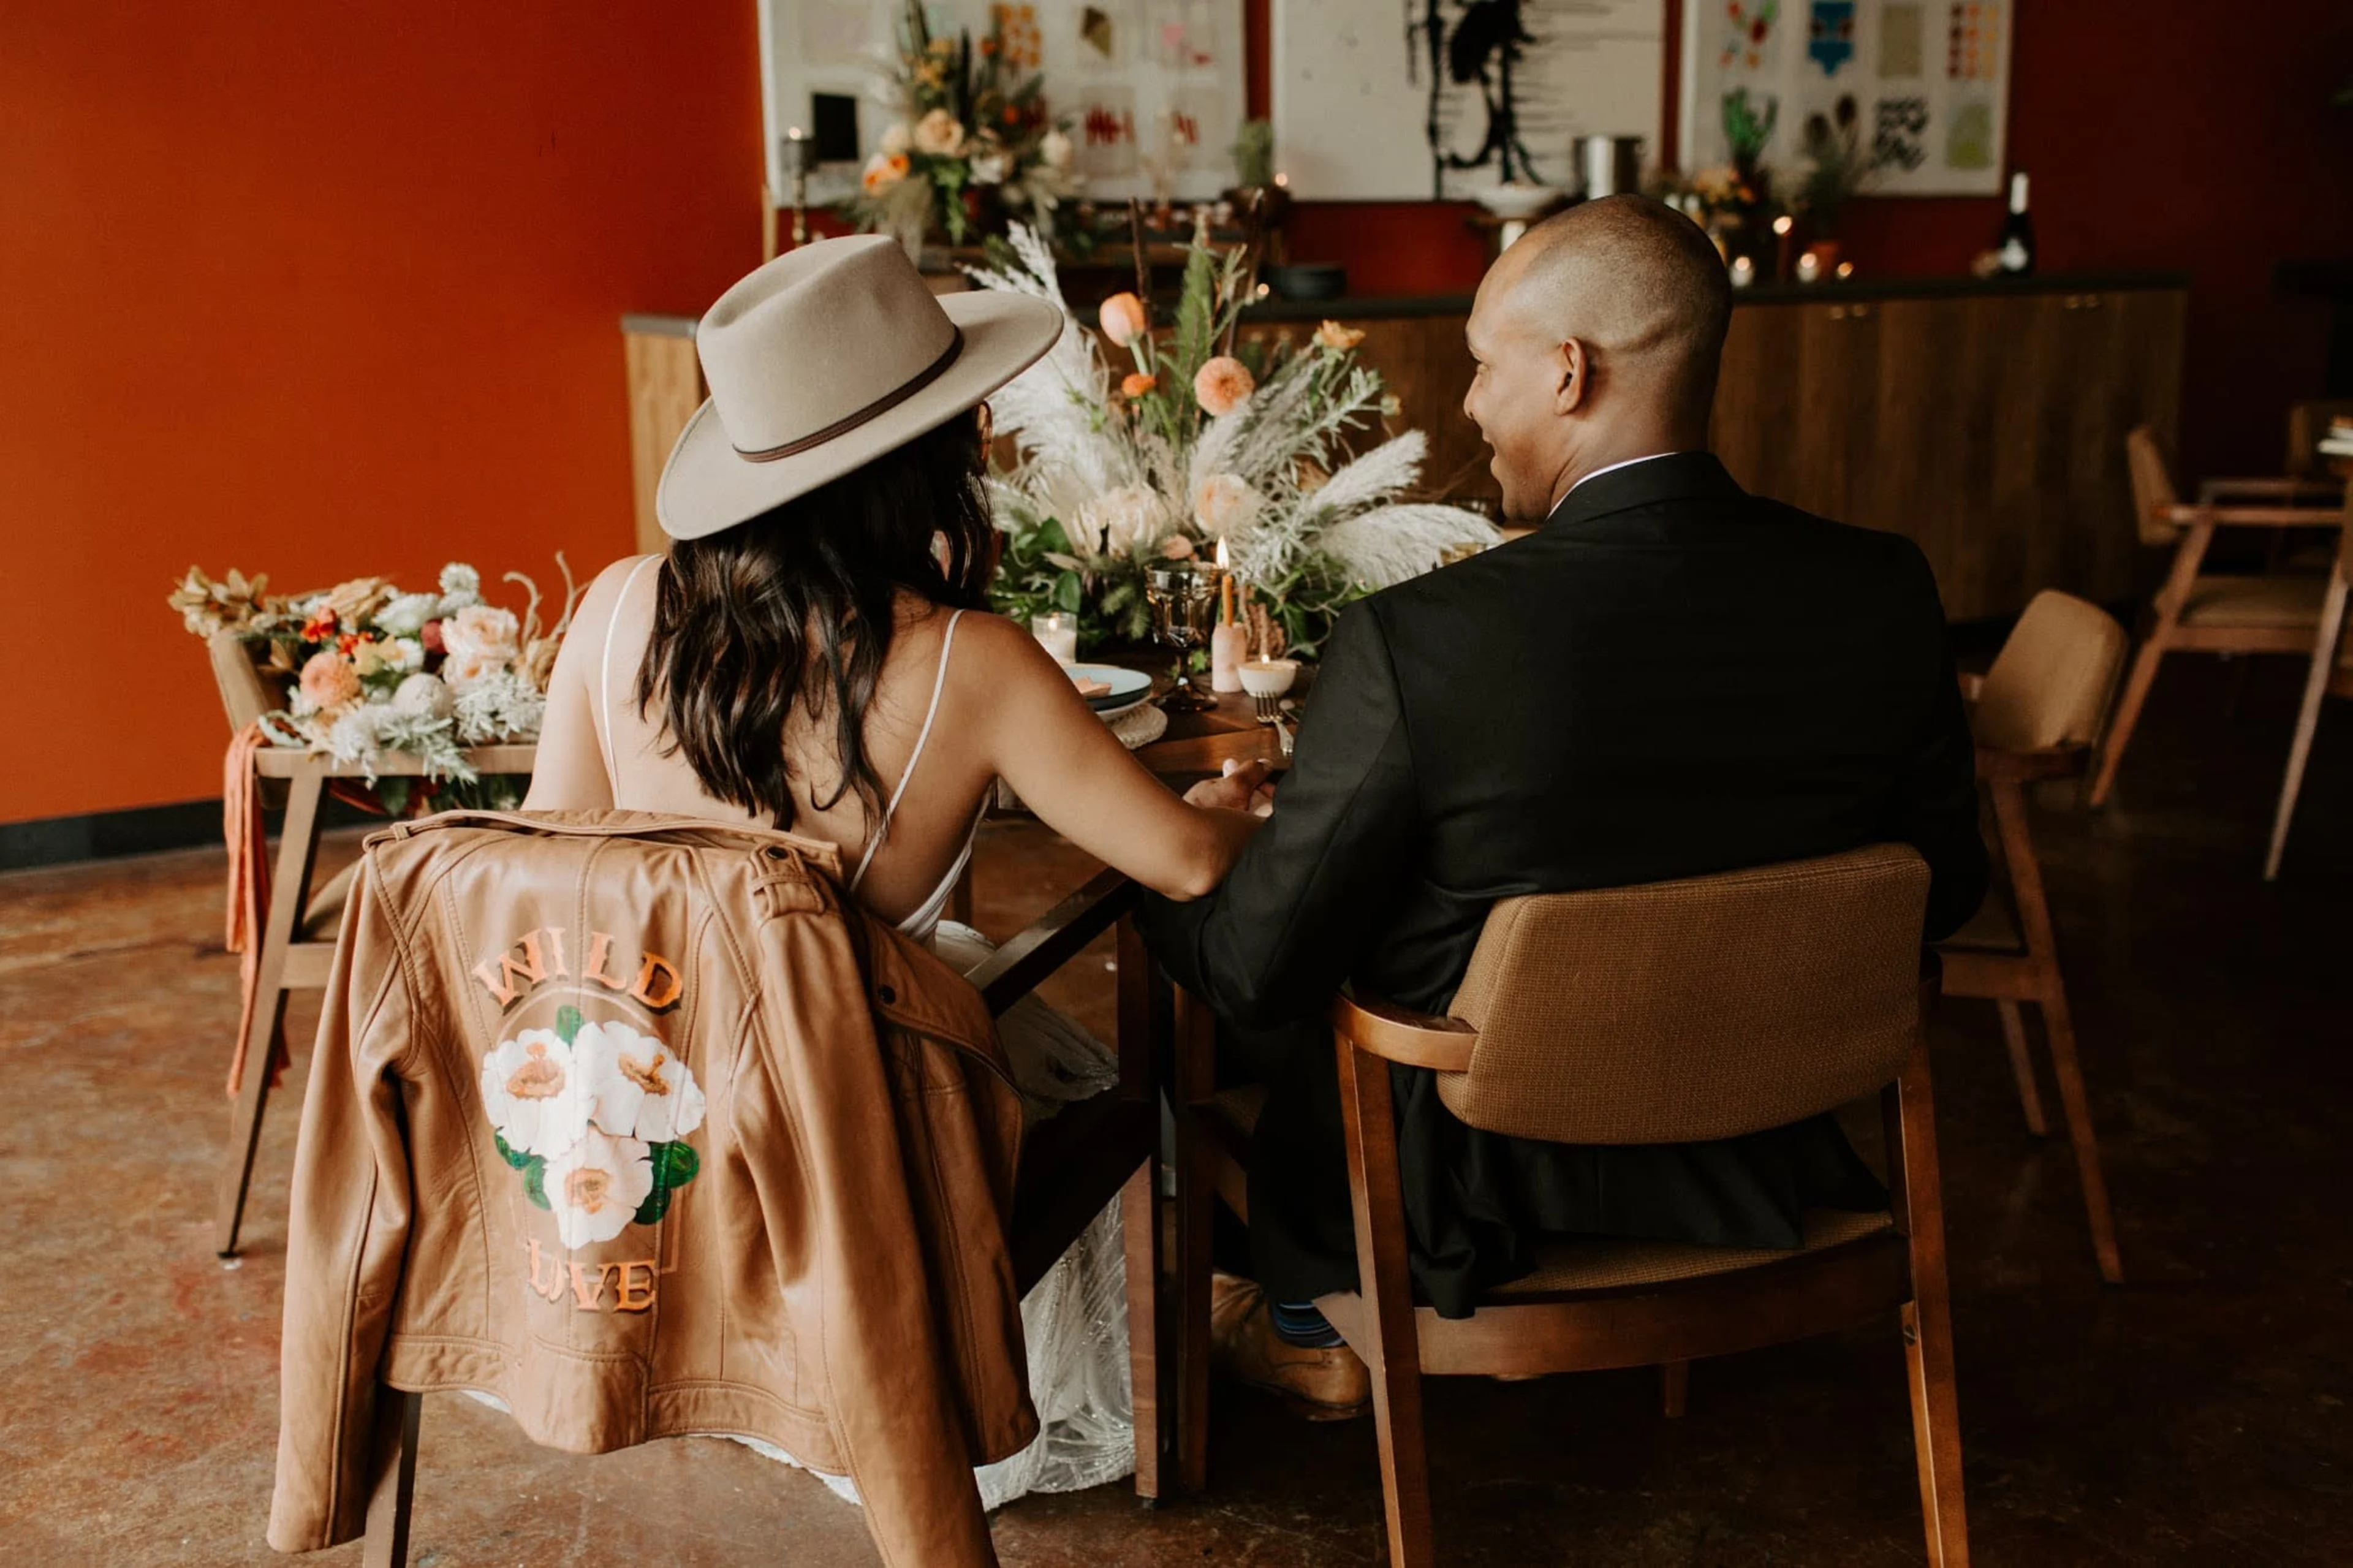 A bride and groom sit at a table with a jacket draped over a chair.